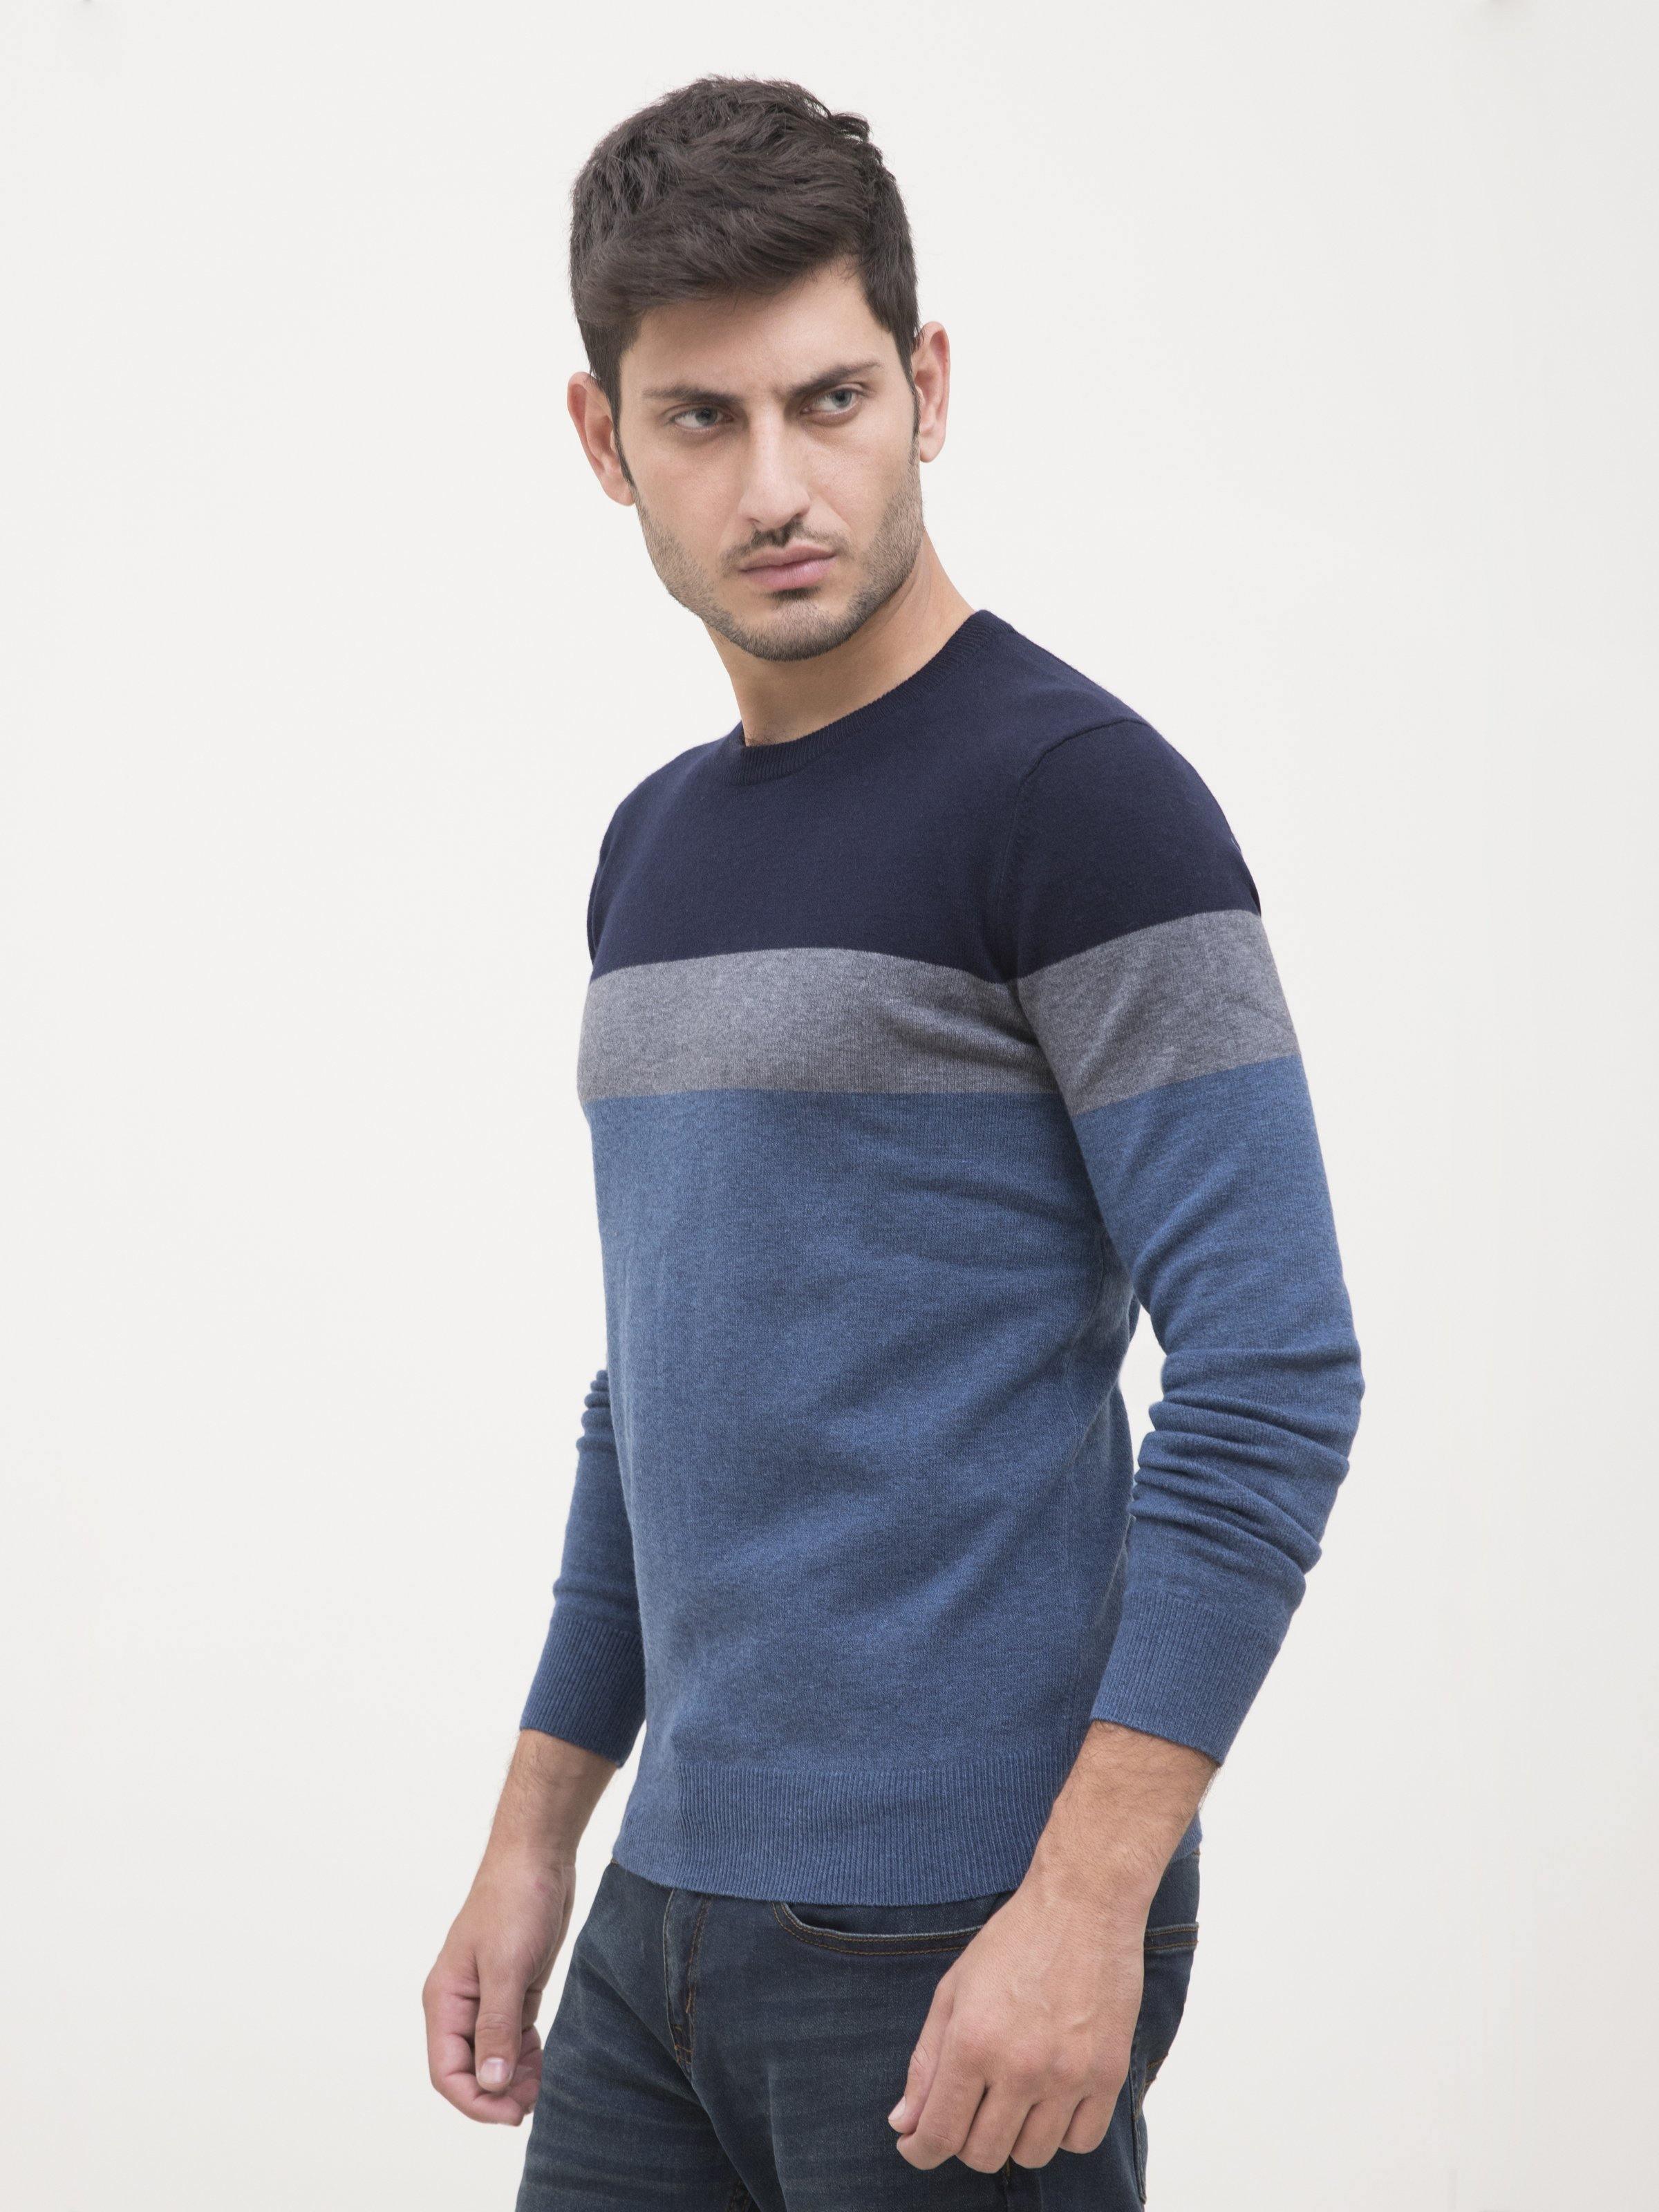 SWEATER ROUND NECK FULL SLEEVE BLUE GREY at Charcoal Clothing